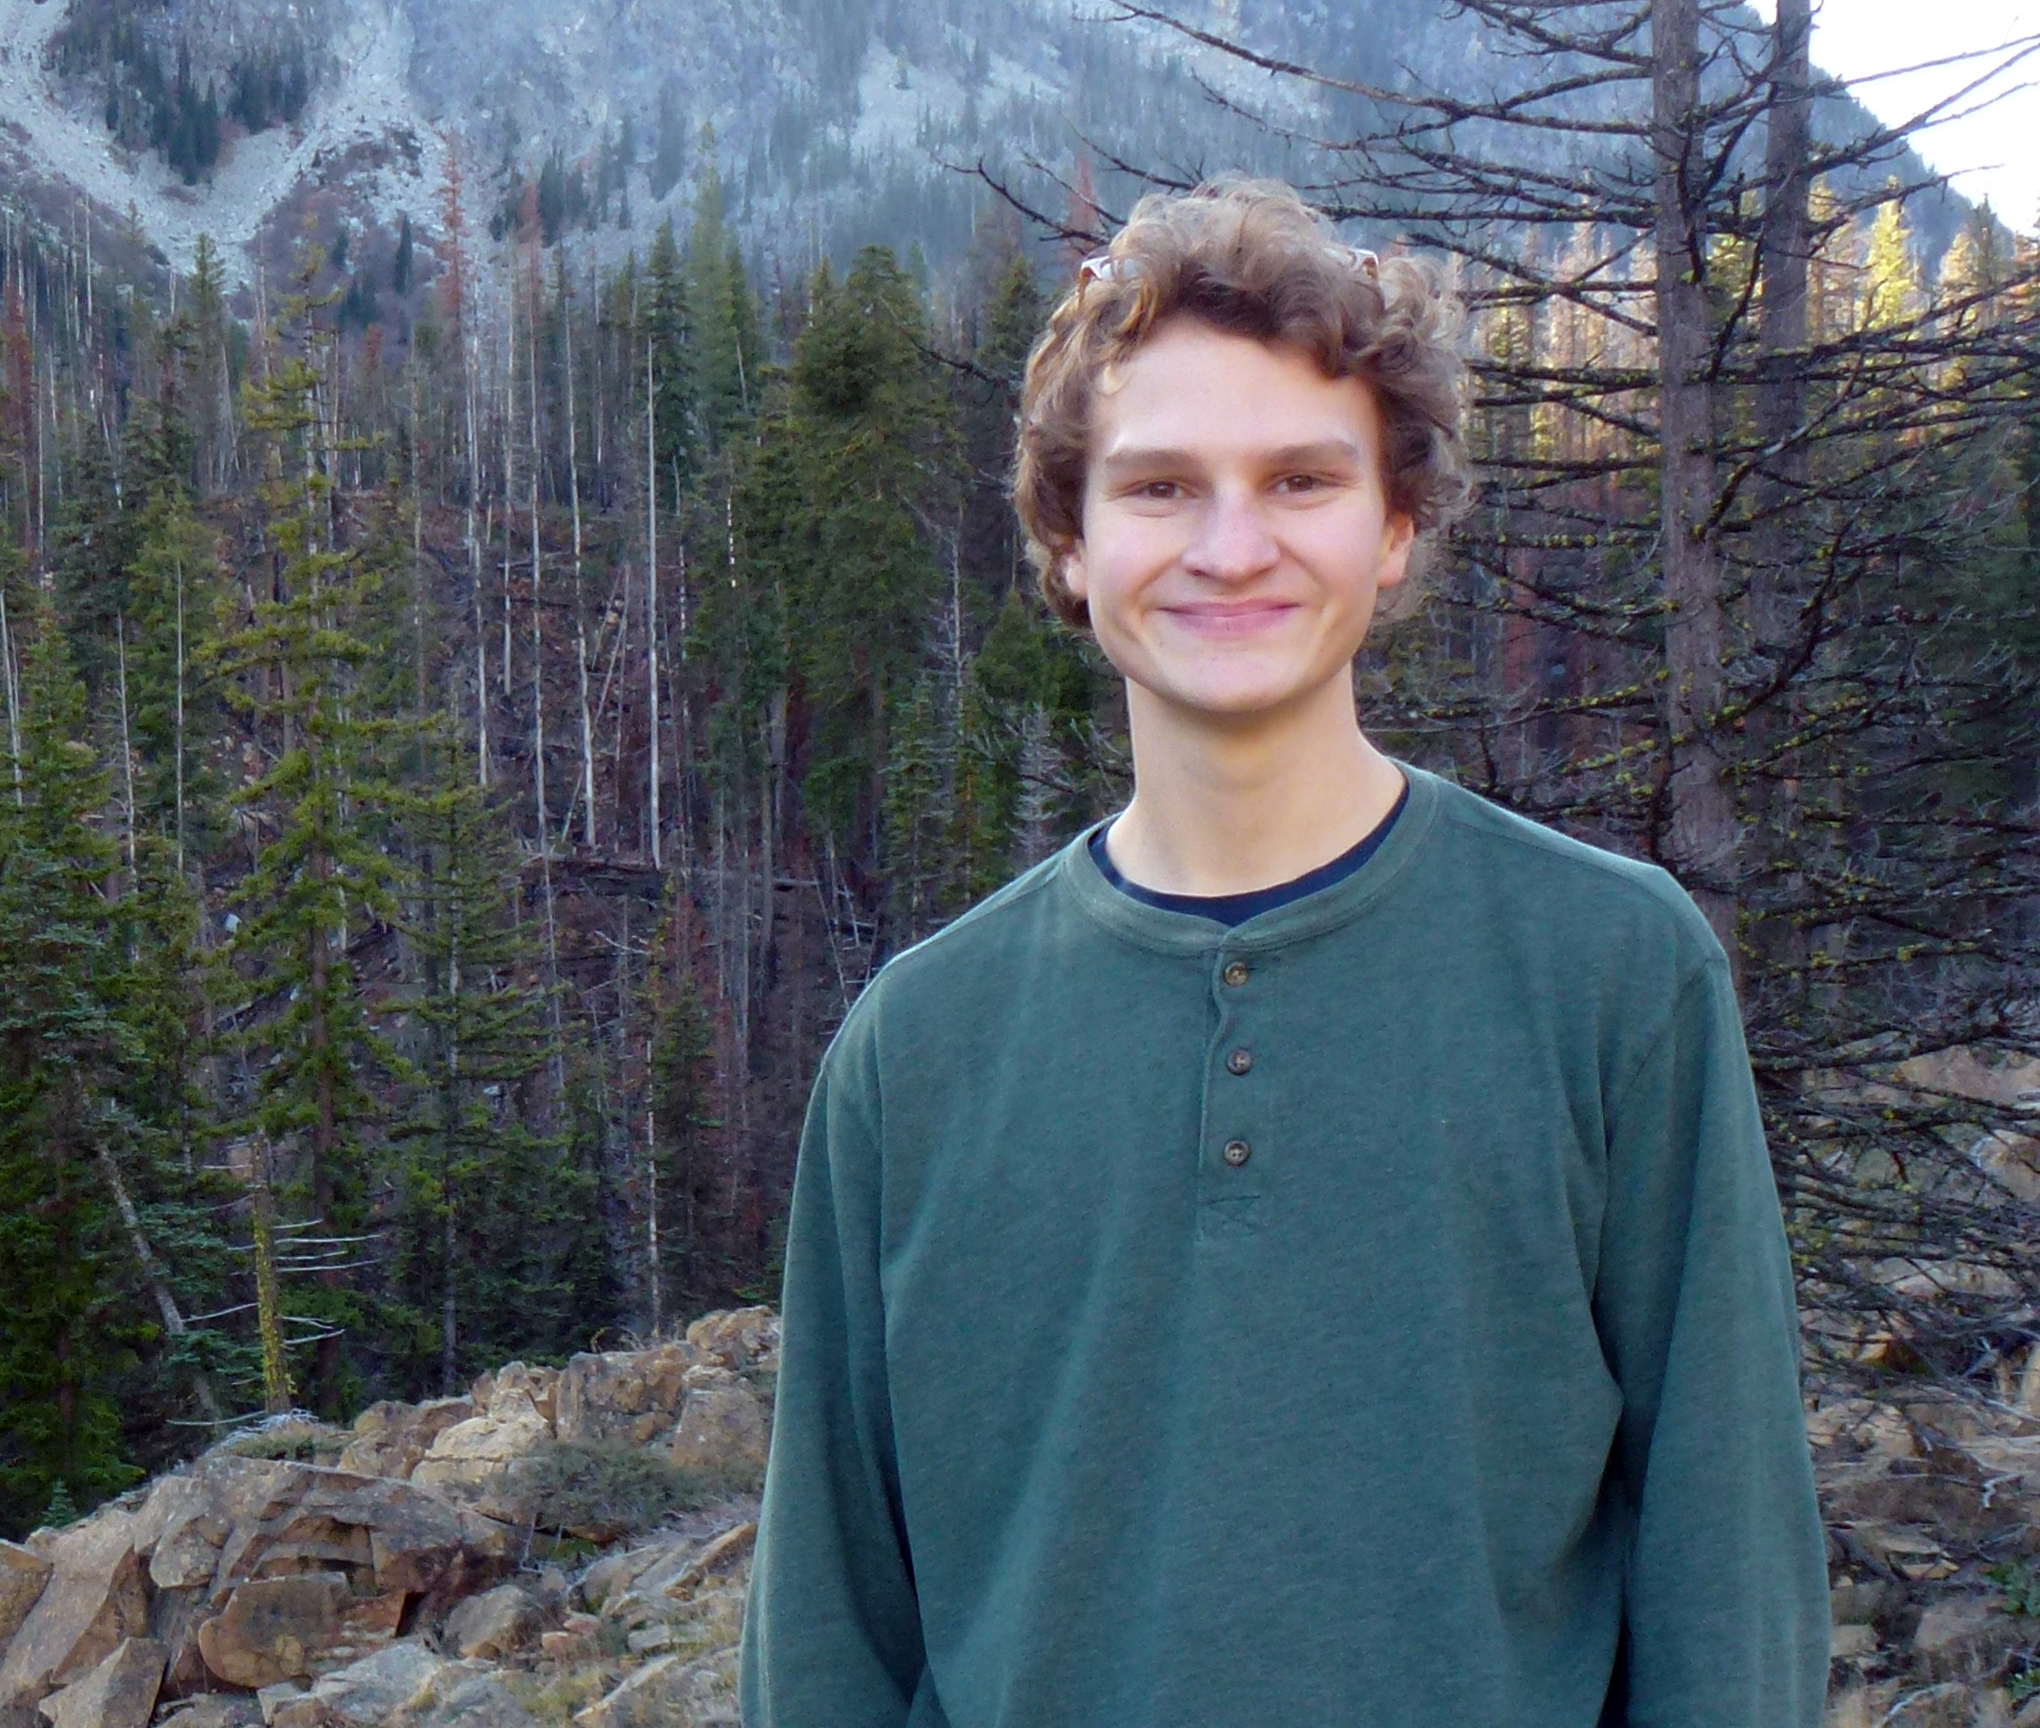 Portrait of Tim Anderson standing in the woods wearing a dark green thermal